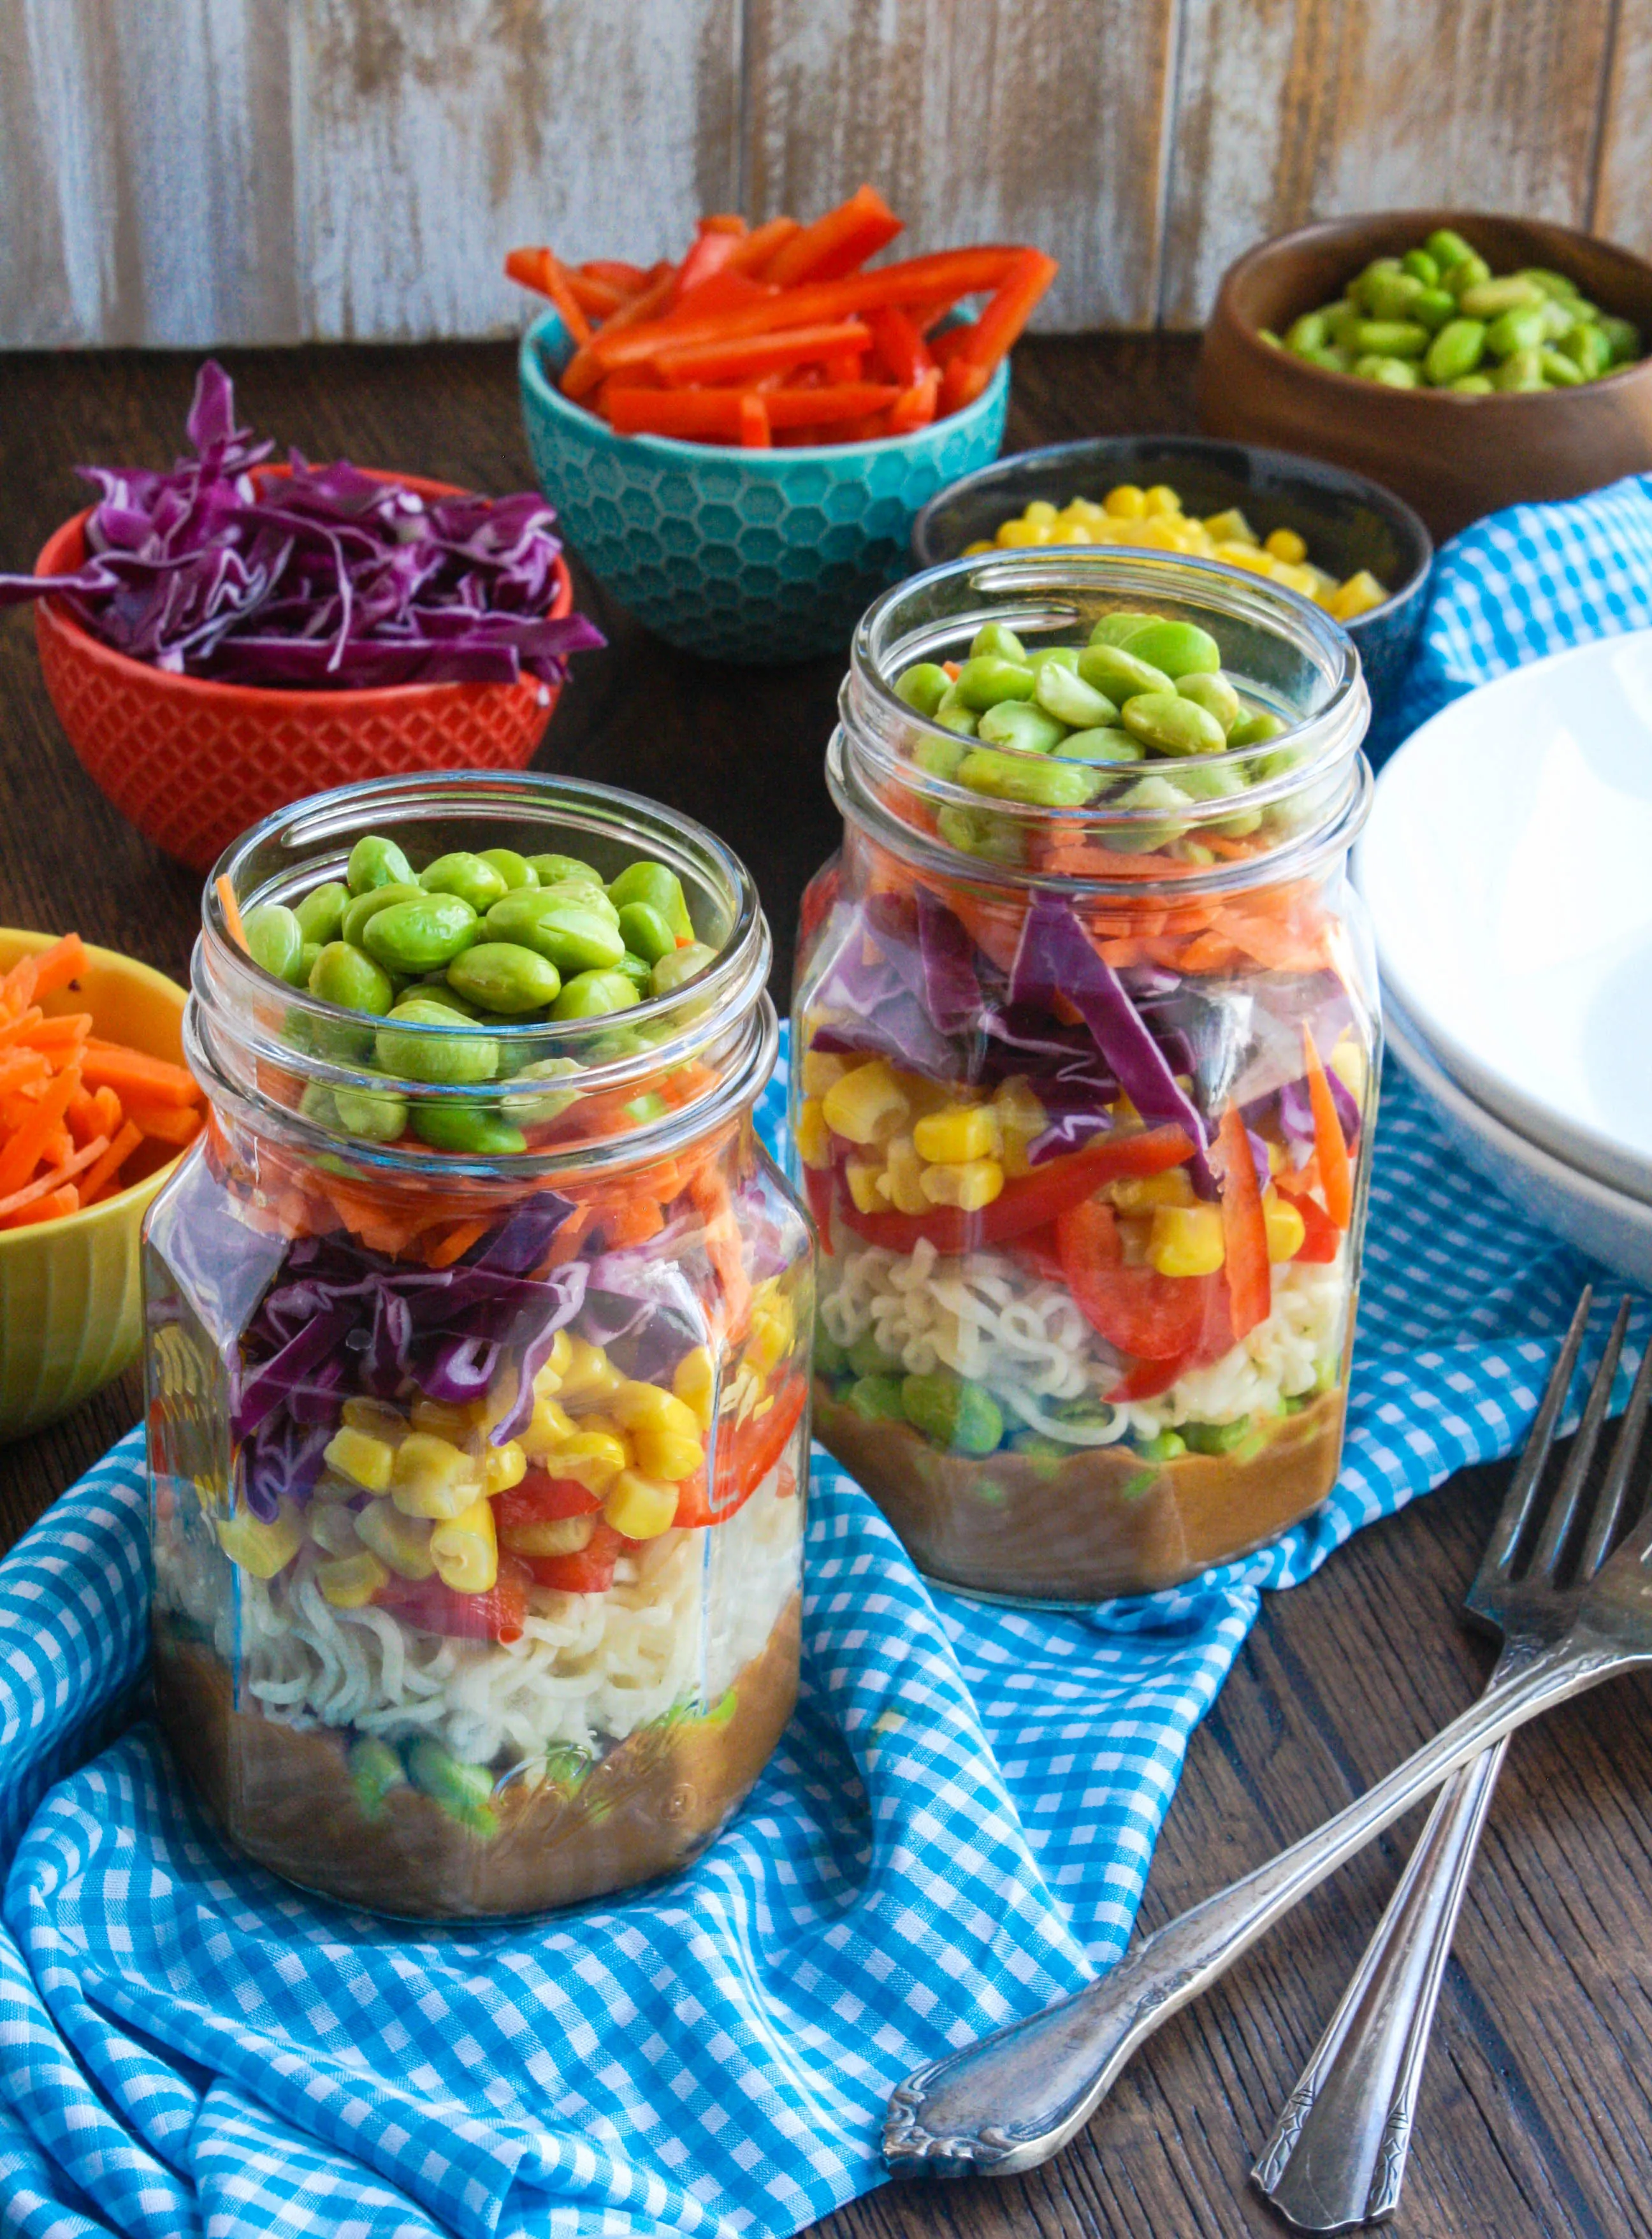 Asian Noodle Salad in a Jar with Spicy Peanut Dressing is a fun way to serve your next salad. It's totally delicious, too!